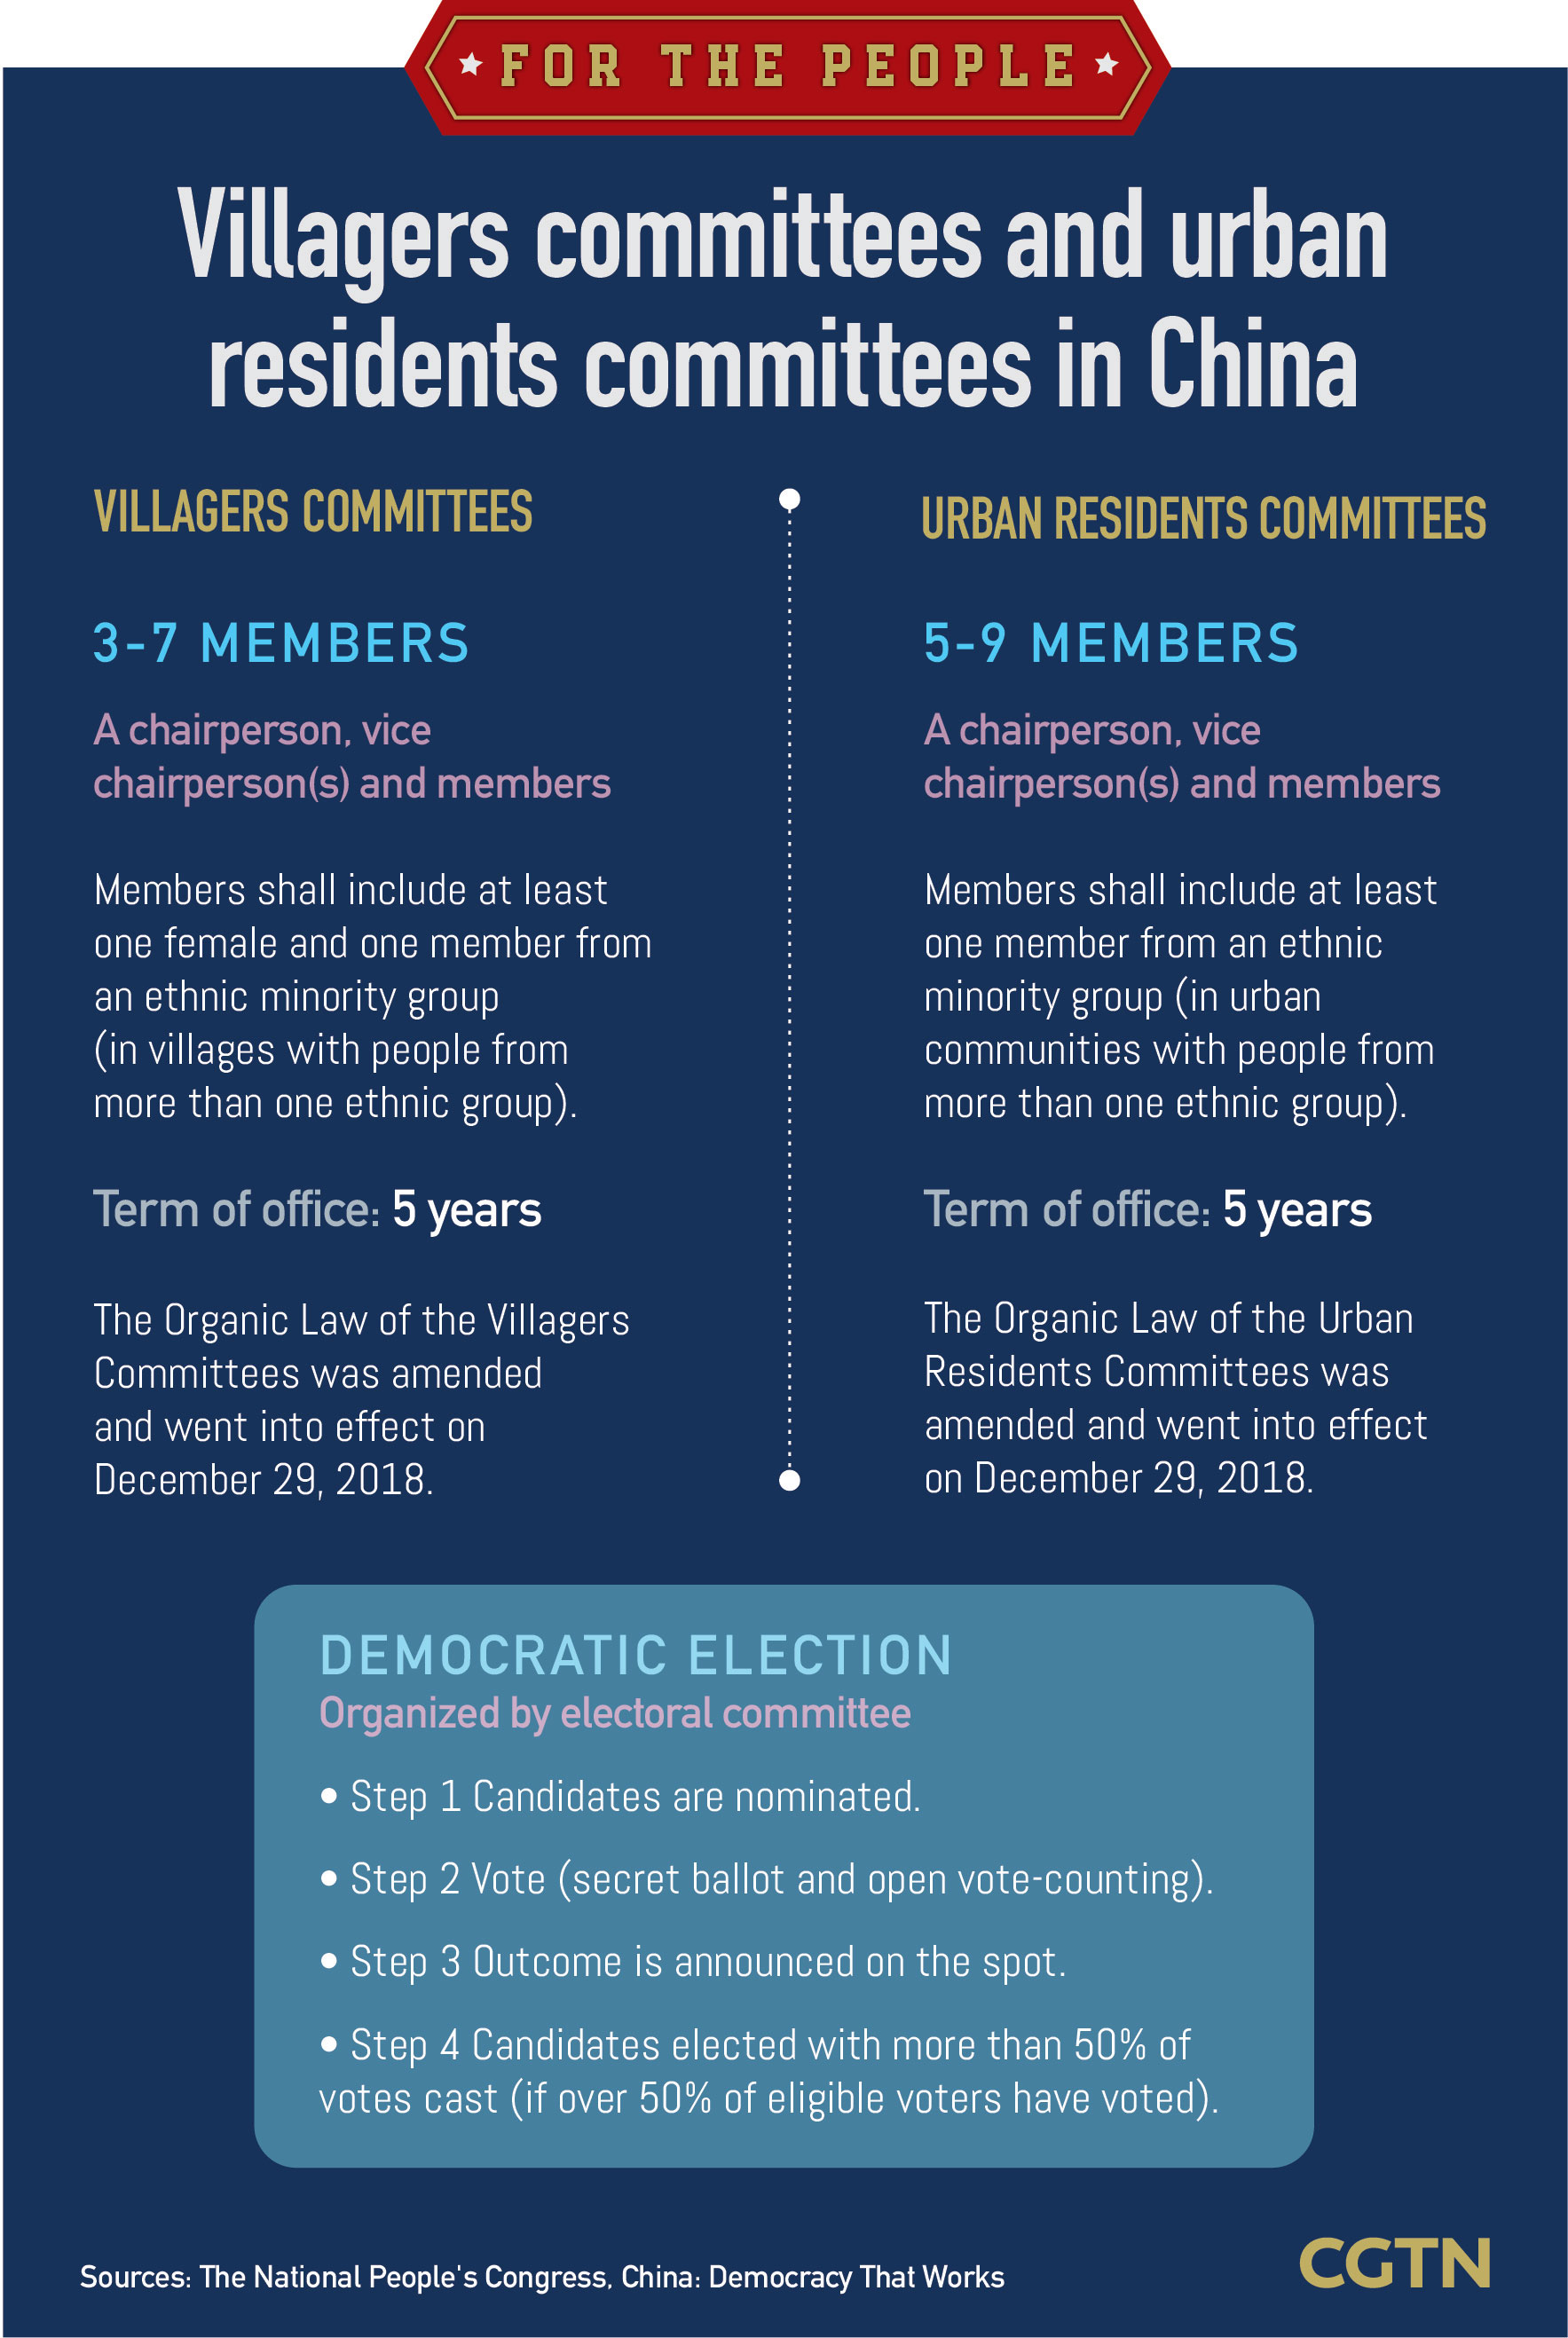 Graphics: How does China's democracy work at the community level?